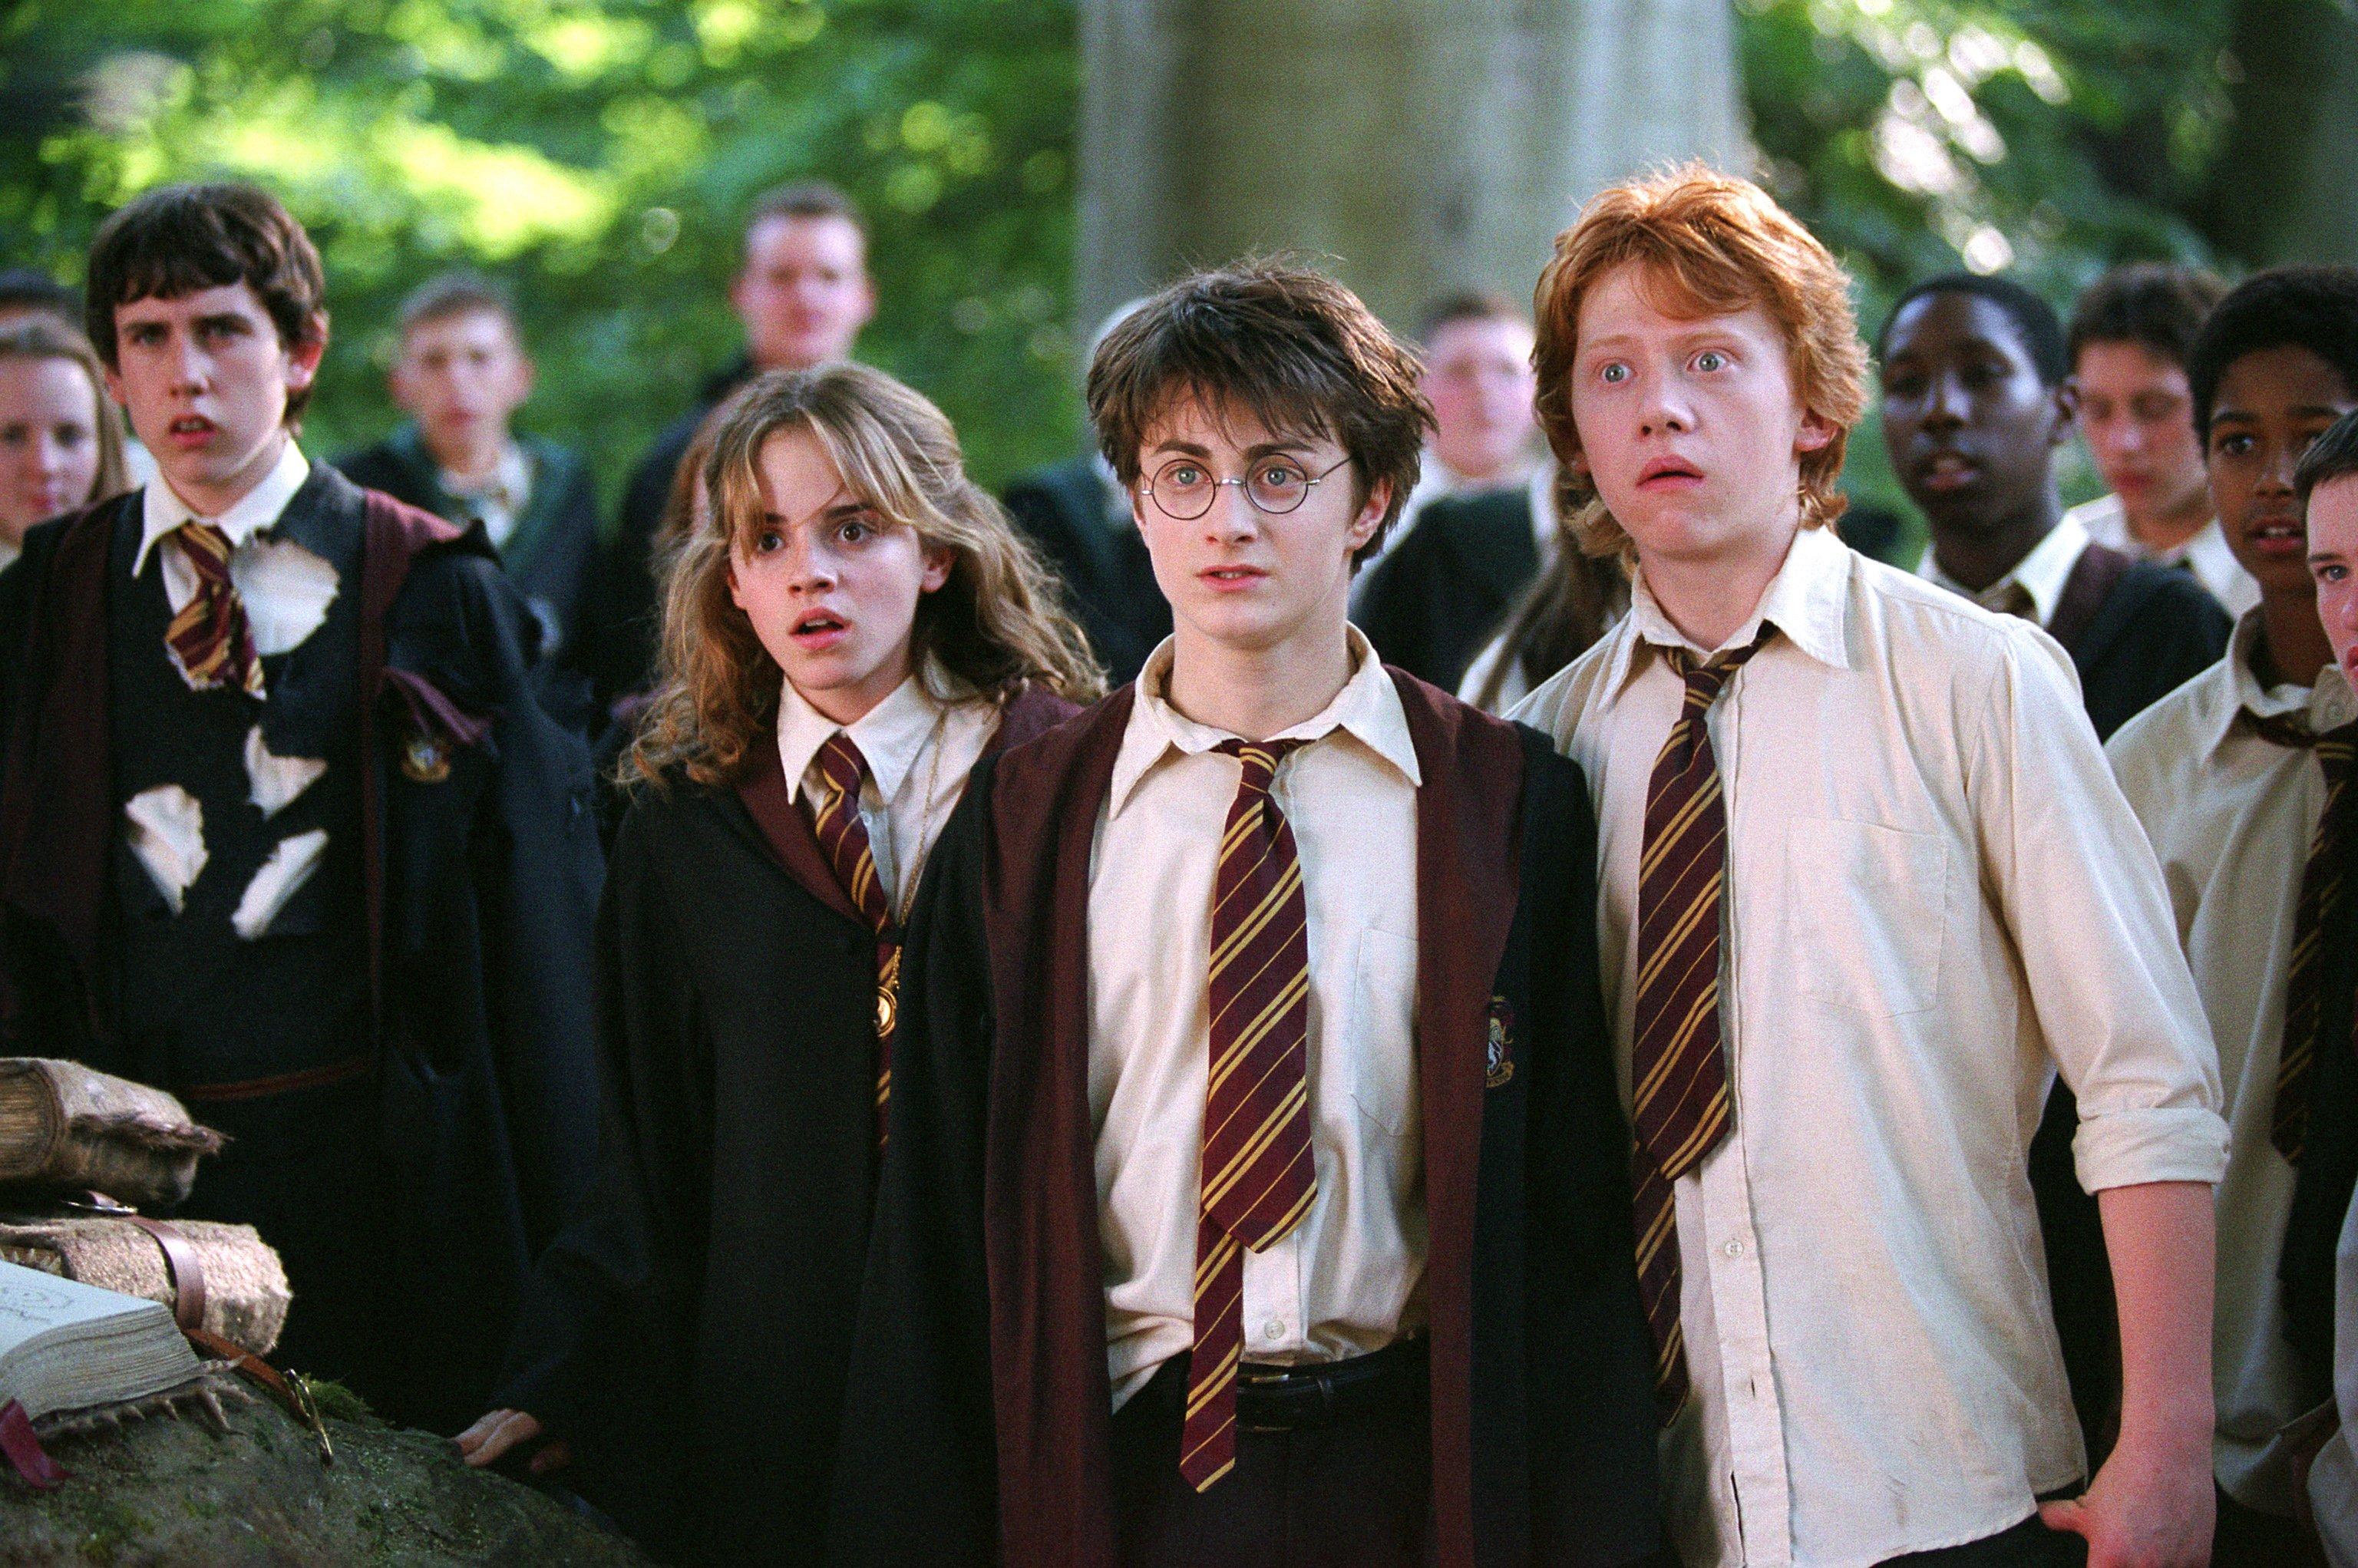 (L-r) EMMA WATSON as Hermione Granger, DANIEL RADCLIFFE as Harry Potter and RUPERT GRINT as Ron Weasley in Warner Bros. PicturesÕ fantasy ÒHarry Potter and the Prisoner of Azkaban.Ó PHOTOGRAPHS TO BE USED SOLELY FOR ADVERTISING, PROMOTION, PUBLICITY OR REVIEWS OF THIS SPECIFIC MOTION PICTURE AND TO REMAIN THE PROPERTY OF THE STUDIO. NOT FOR SALE OR REDISTRIBUTION.